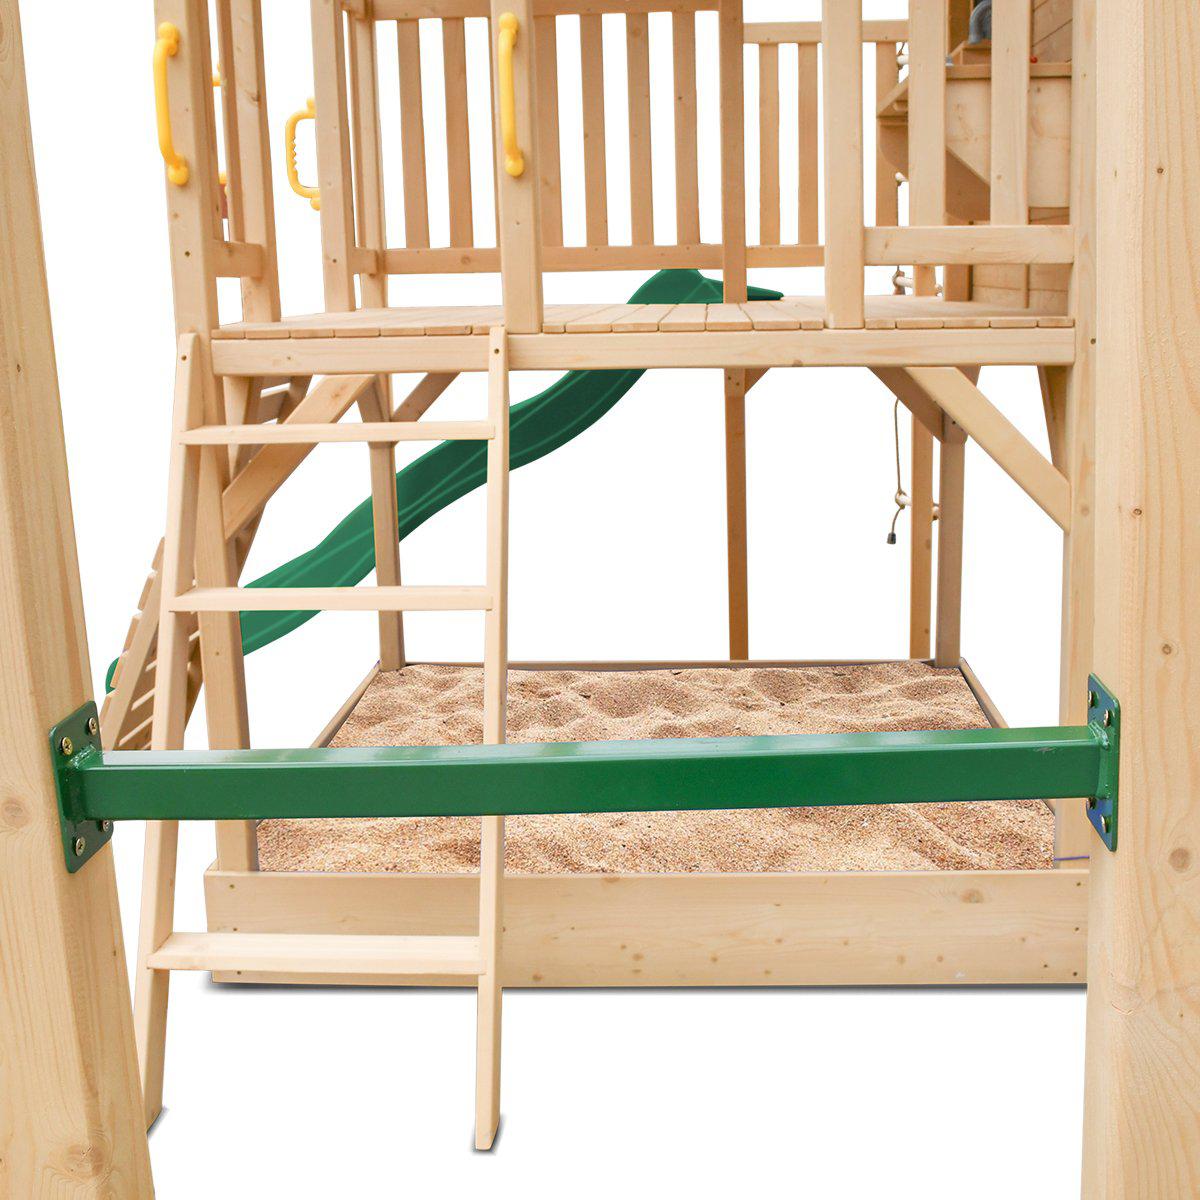 Kingston Cubby House: Outdoor Adventure with Green Slide - Buy